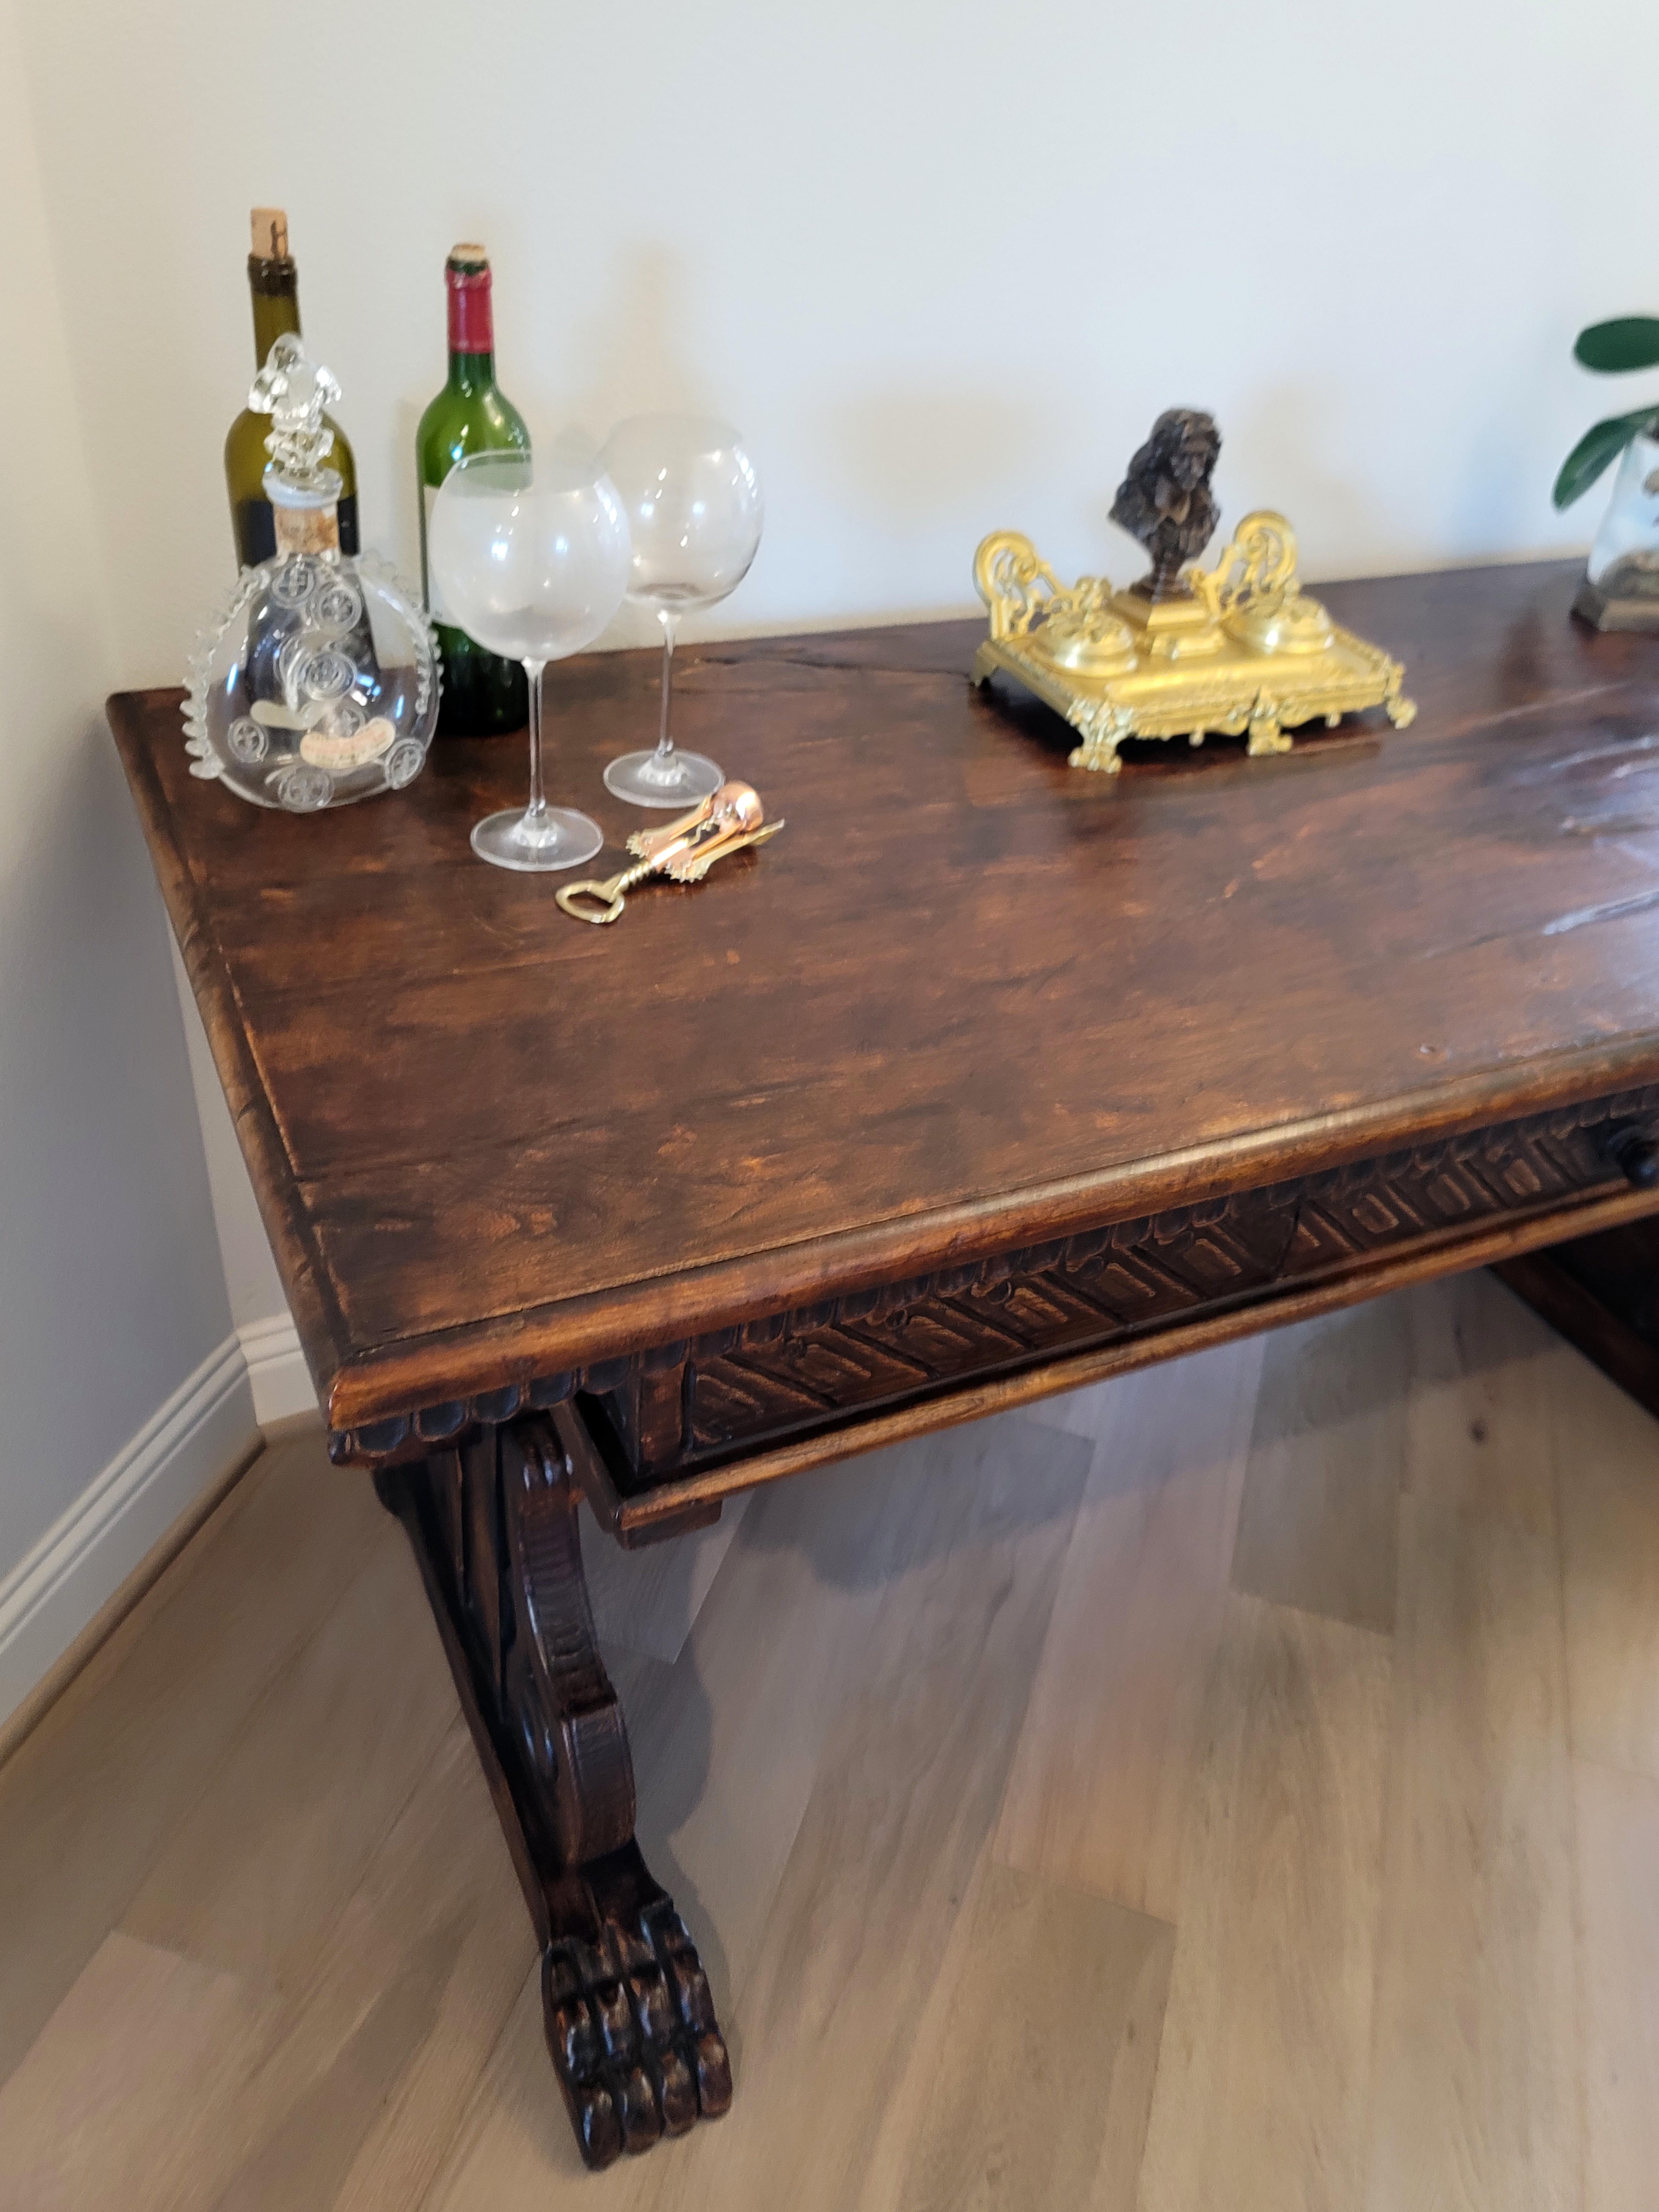 19th Century Portuguese Renaissance Revival Trestle Table In Good Condition For Sale In Forney, TX